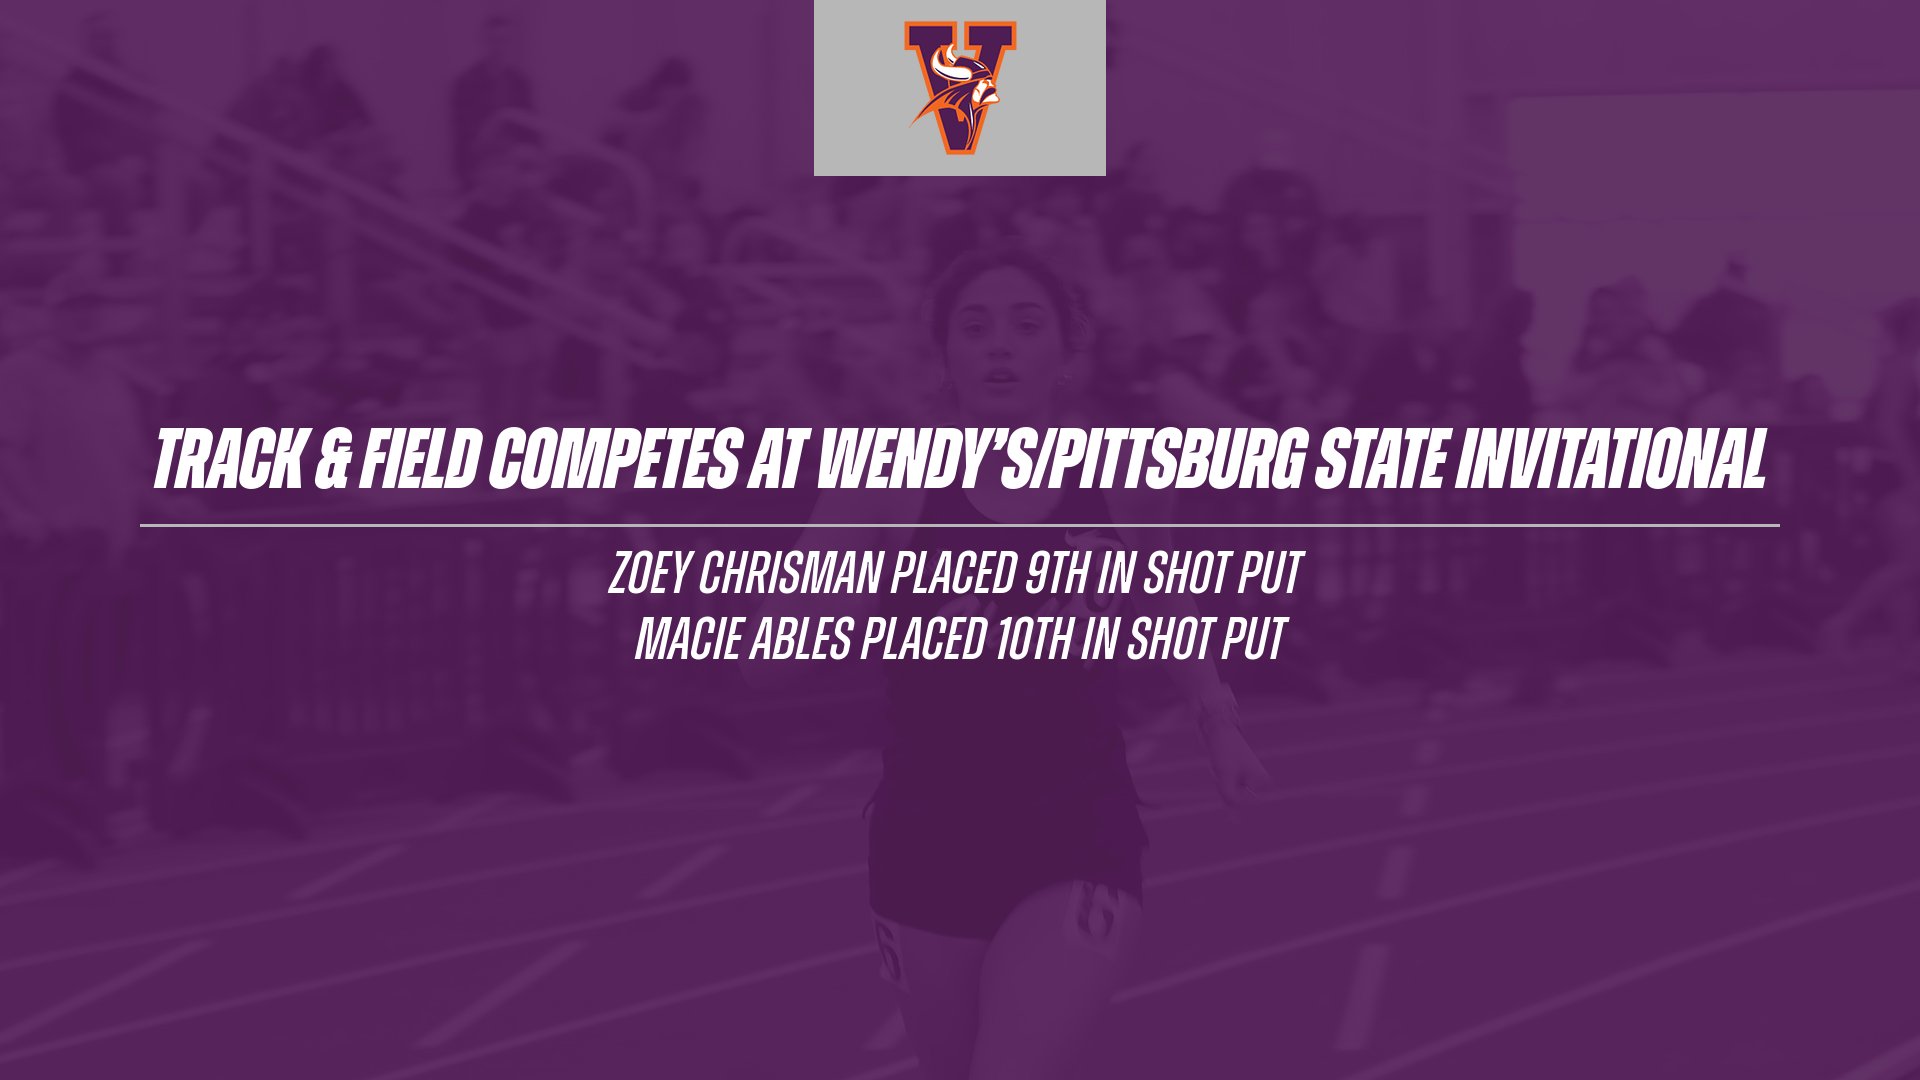 TRACK AND FIELD TEAMS COMPETE AT WENDY'S/PITTSBURG STATE INVITATIONAL